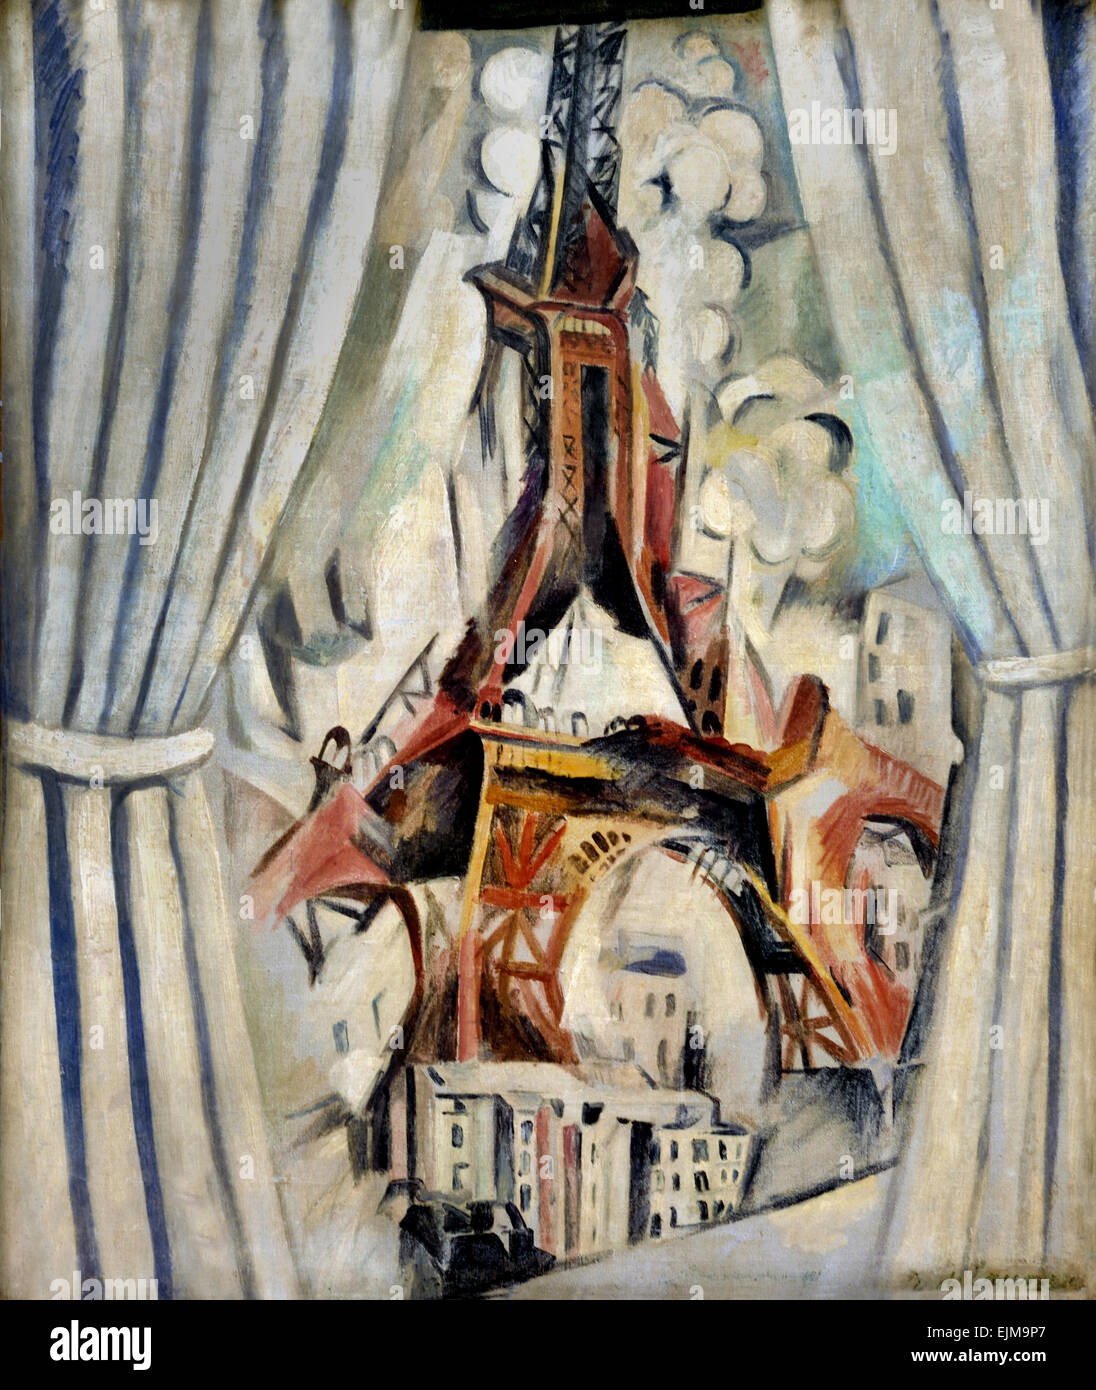 La tour aux rideaux - The Tower with Curtains 1910 Robert Delaunay (1885 - 1941) France French Stock Photo